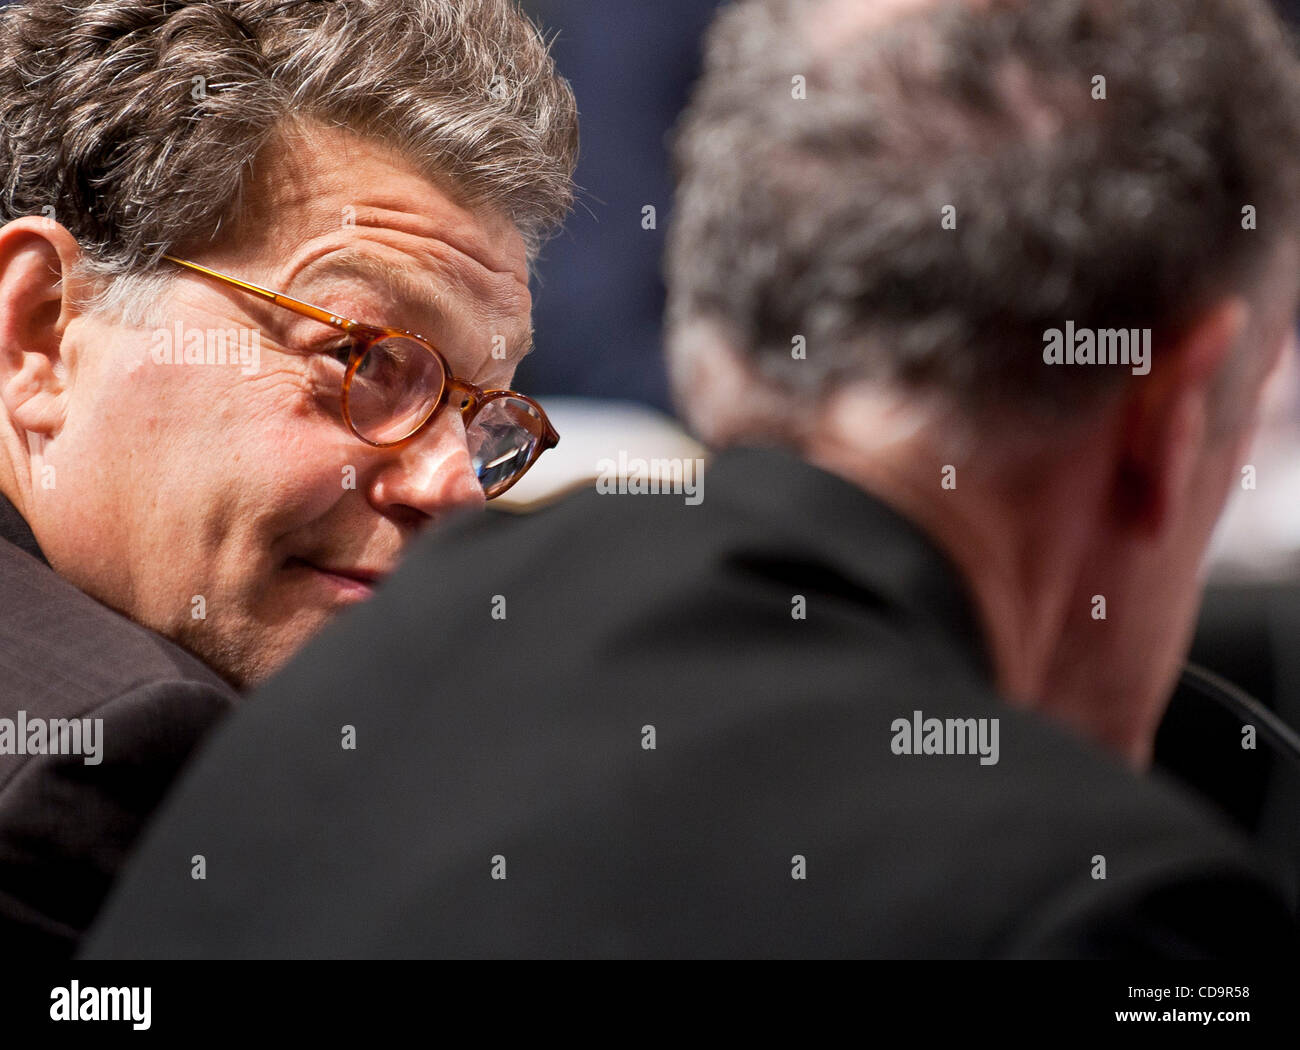 Jul 20, 2010 - Washington, District of Columbia, U.S., - Senator AL FRANKEN (D-MN) confers with Senator Kaufman before the start of the Senate Judiciary Committee meeting on Tuesday. The committee voted, 13-6, in favor of Solicitor General KaganÃ•s confirmation to the Supreme Court. The vote was lar Stock Photo